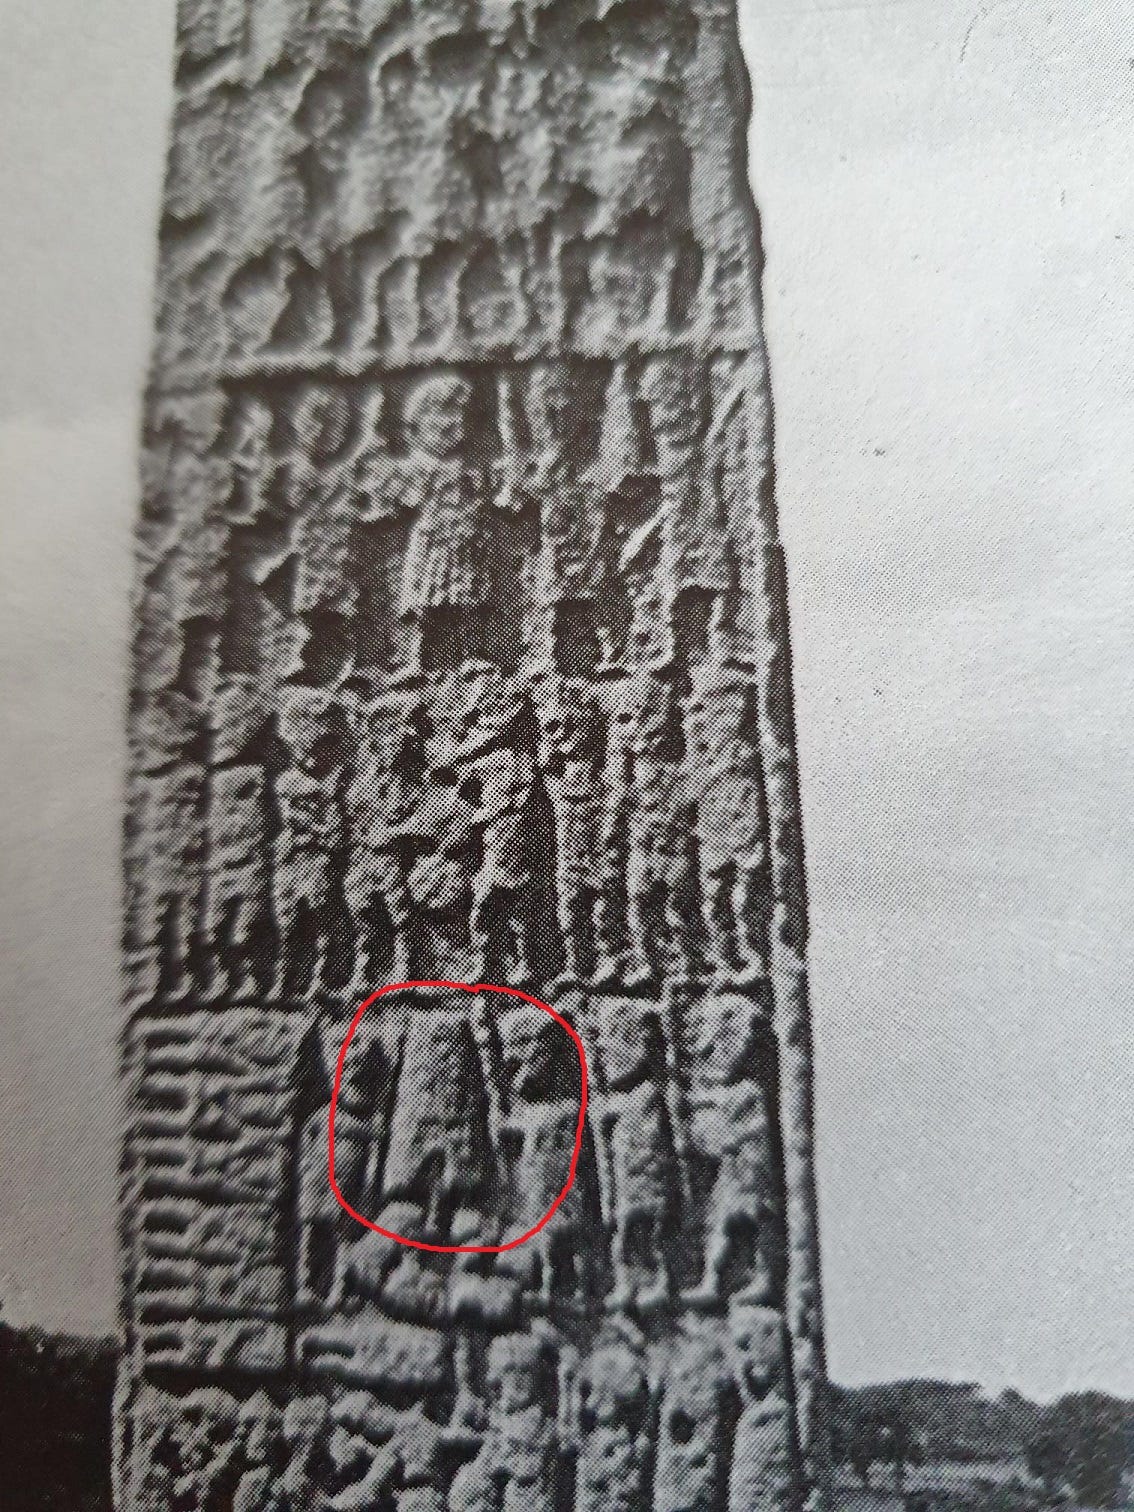 Black and white photo with a detail from the reverse face of Sueno's Stone, showing the mystery tower-like object described in the text of this newsletter.